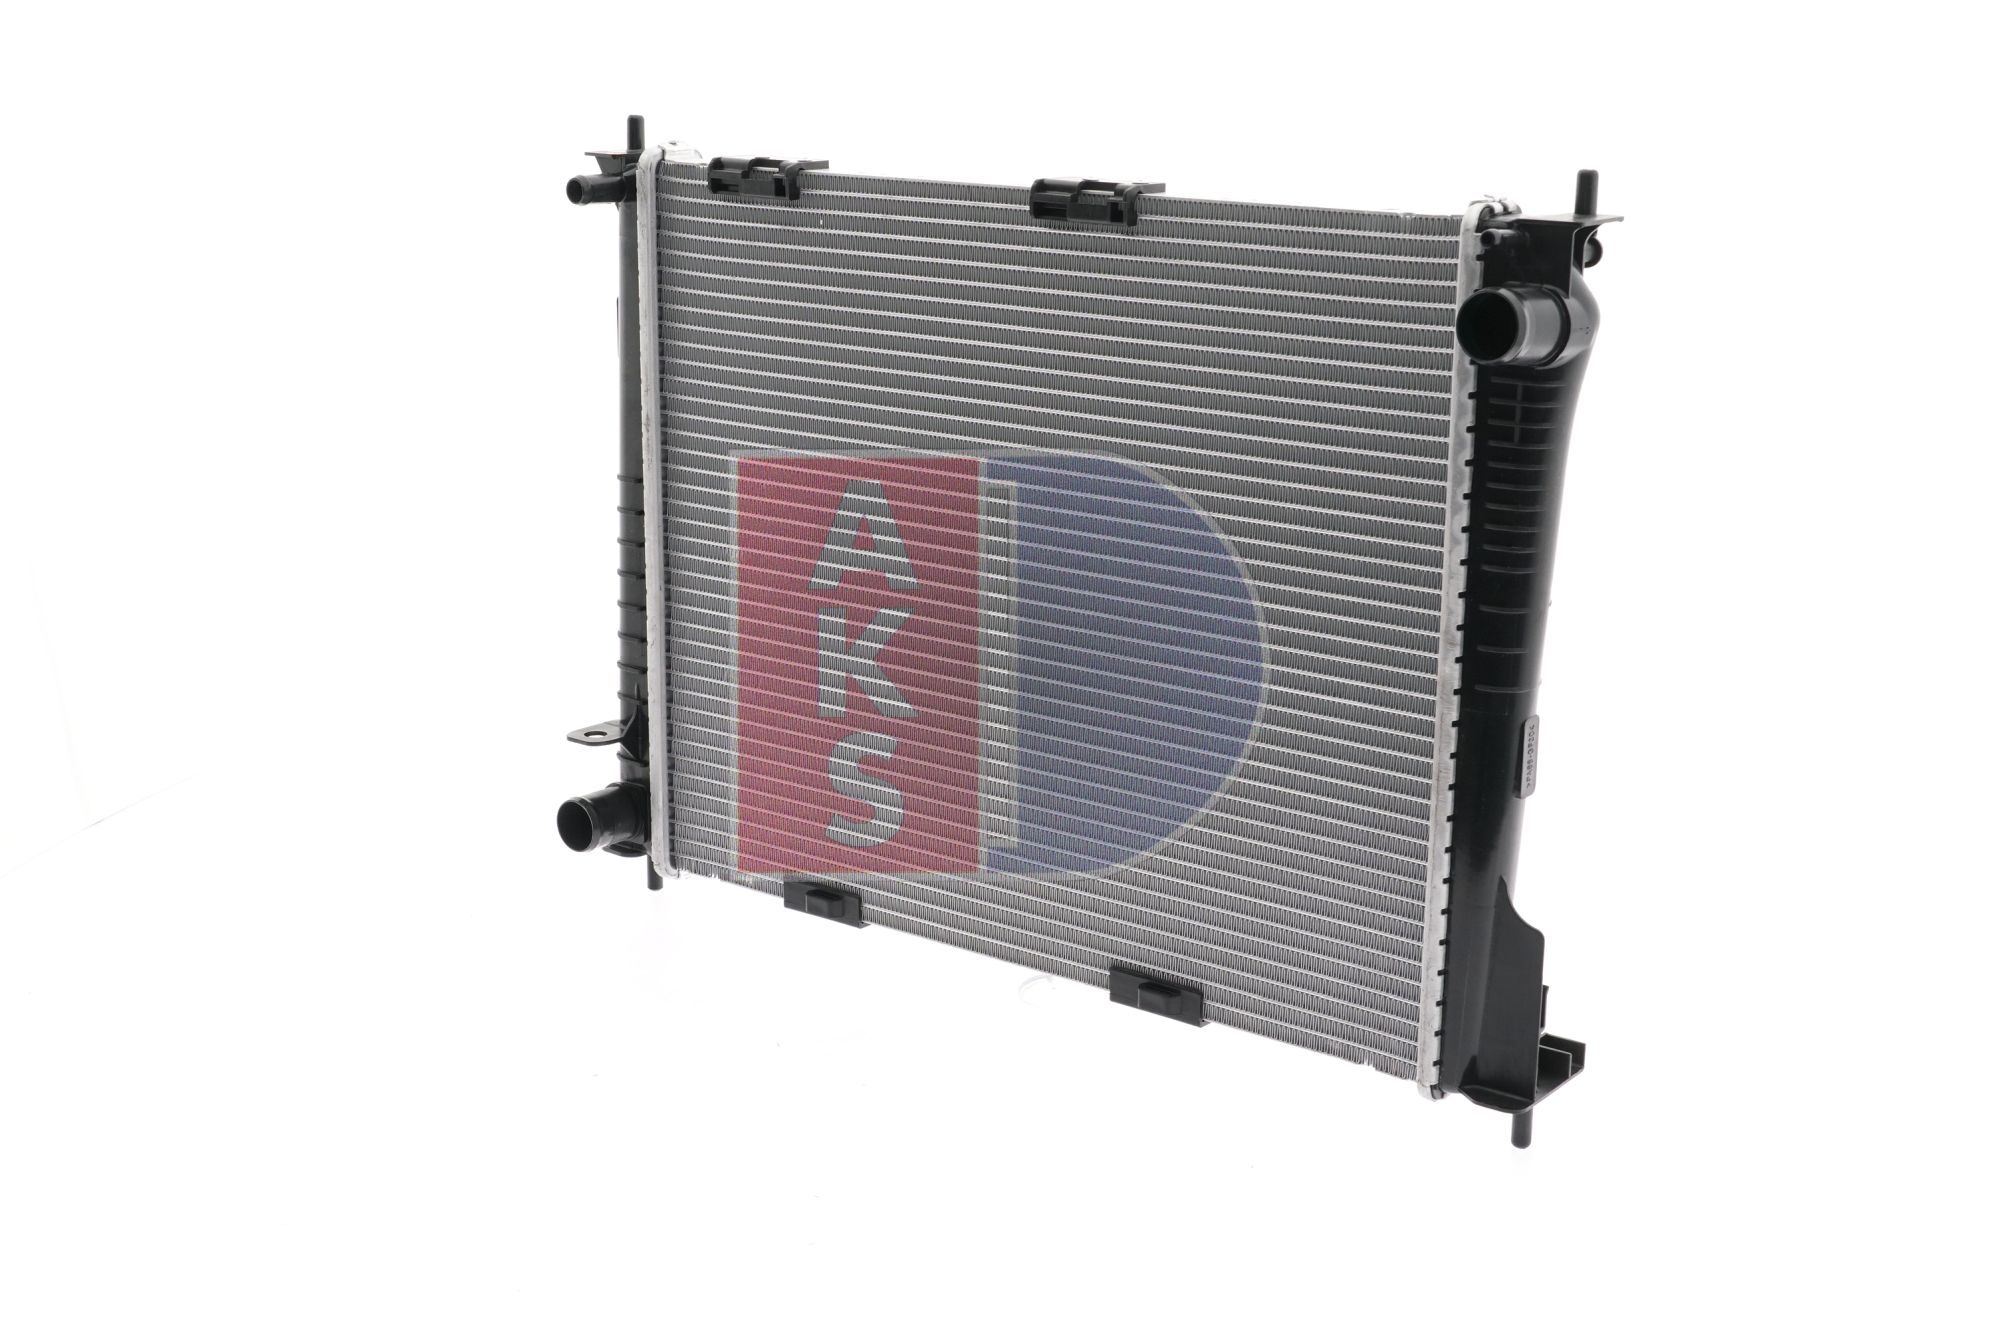 AKS DASIS 180061N Engine radiator Aluminium, for vehicles with air conditioning, 490 x 405 x 27 mm, Manual Transmission, Brazed cooling fins